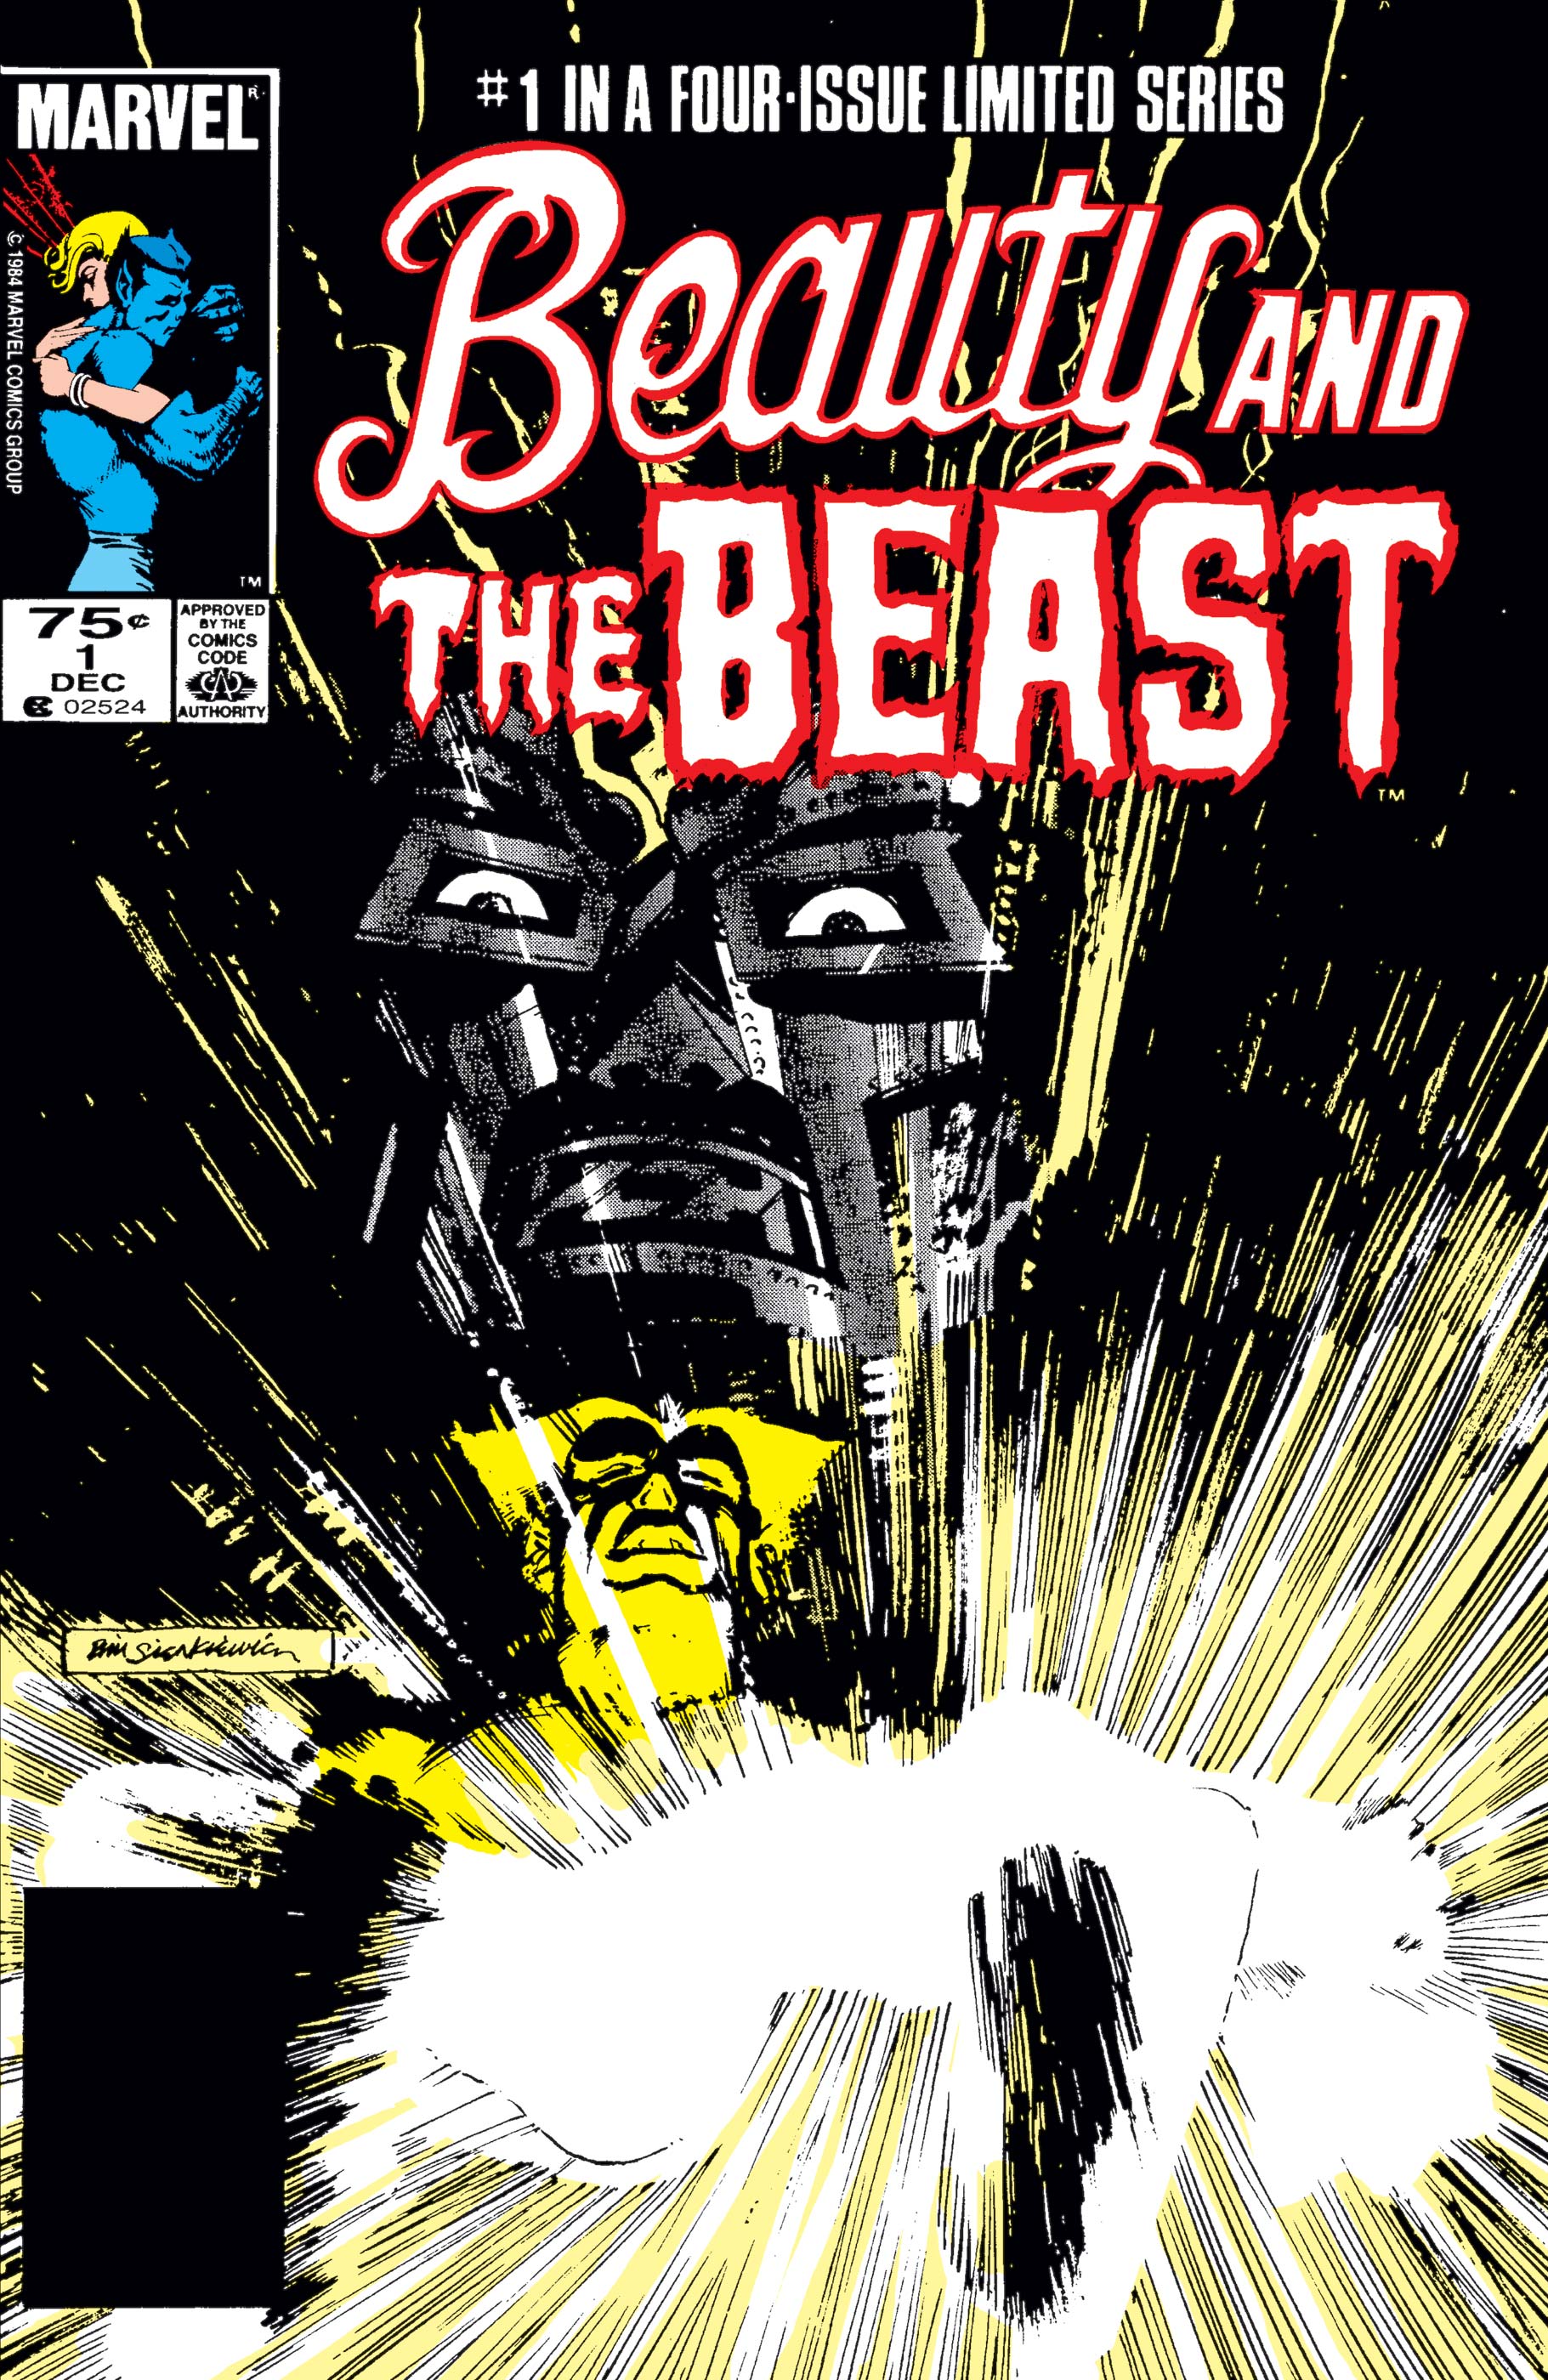 Beauty and the Beast (1985) #1